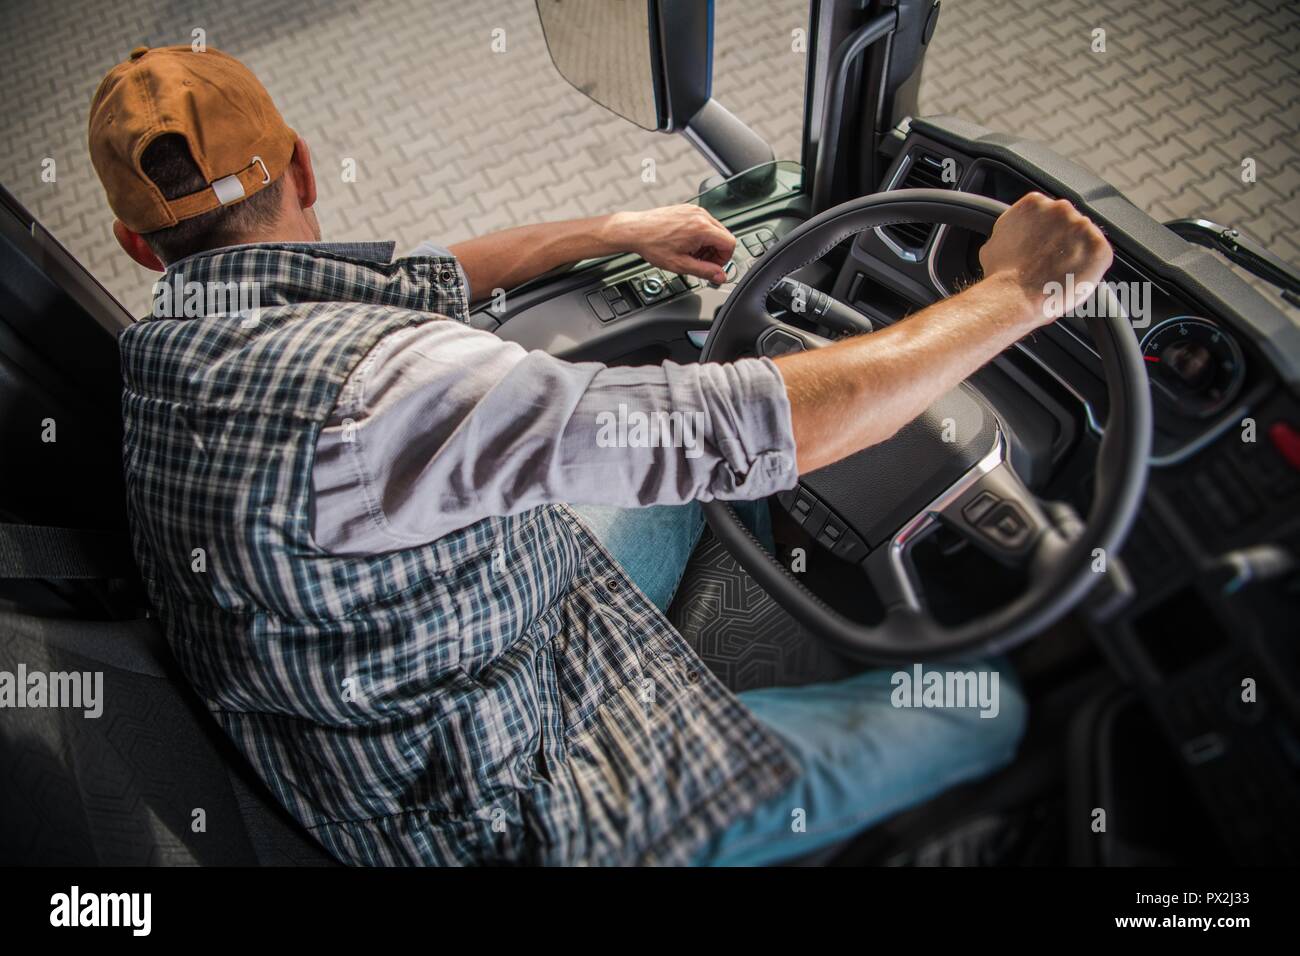 Learning Truck Driving CDL. Commercial Driving License School. Stock Photo